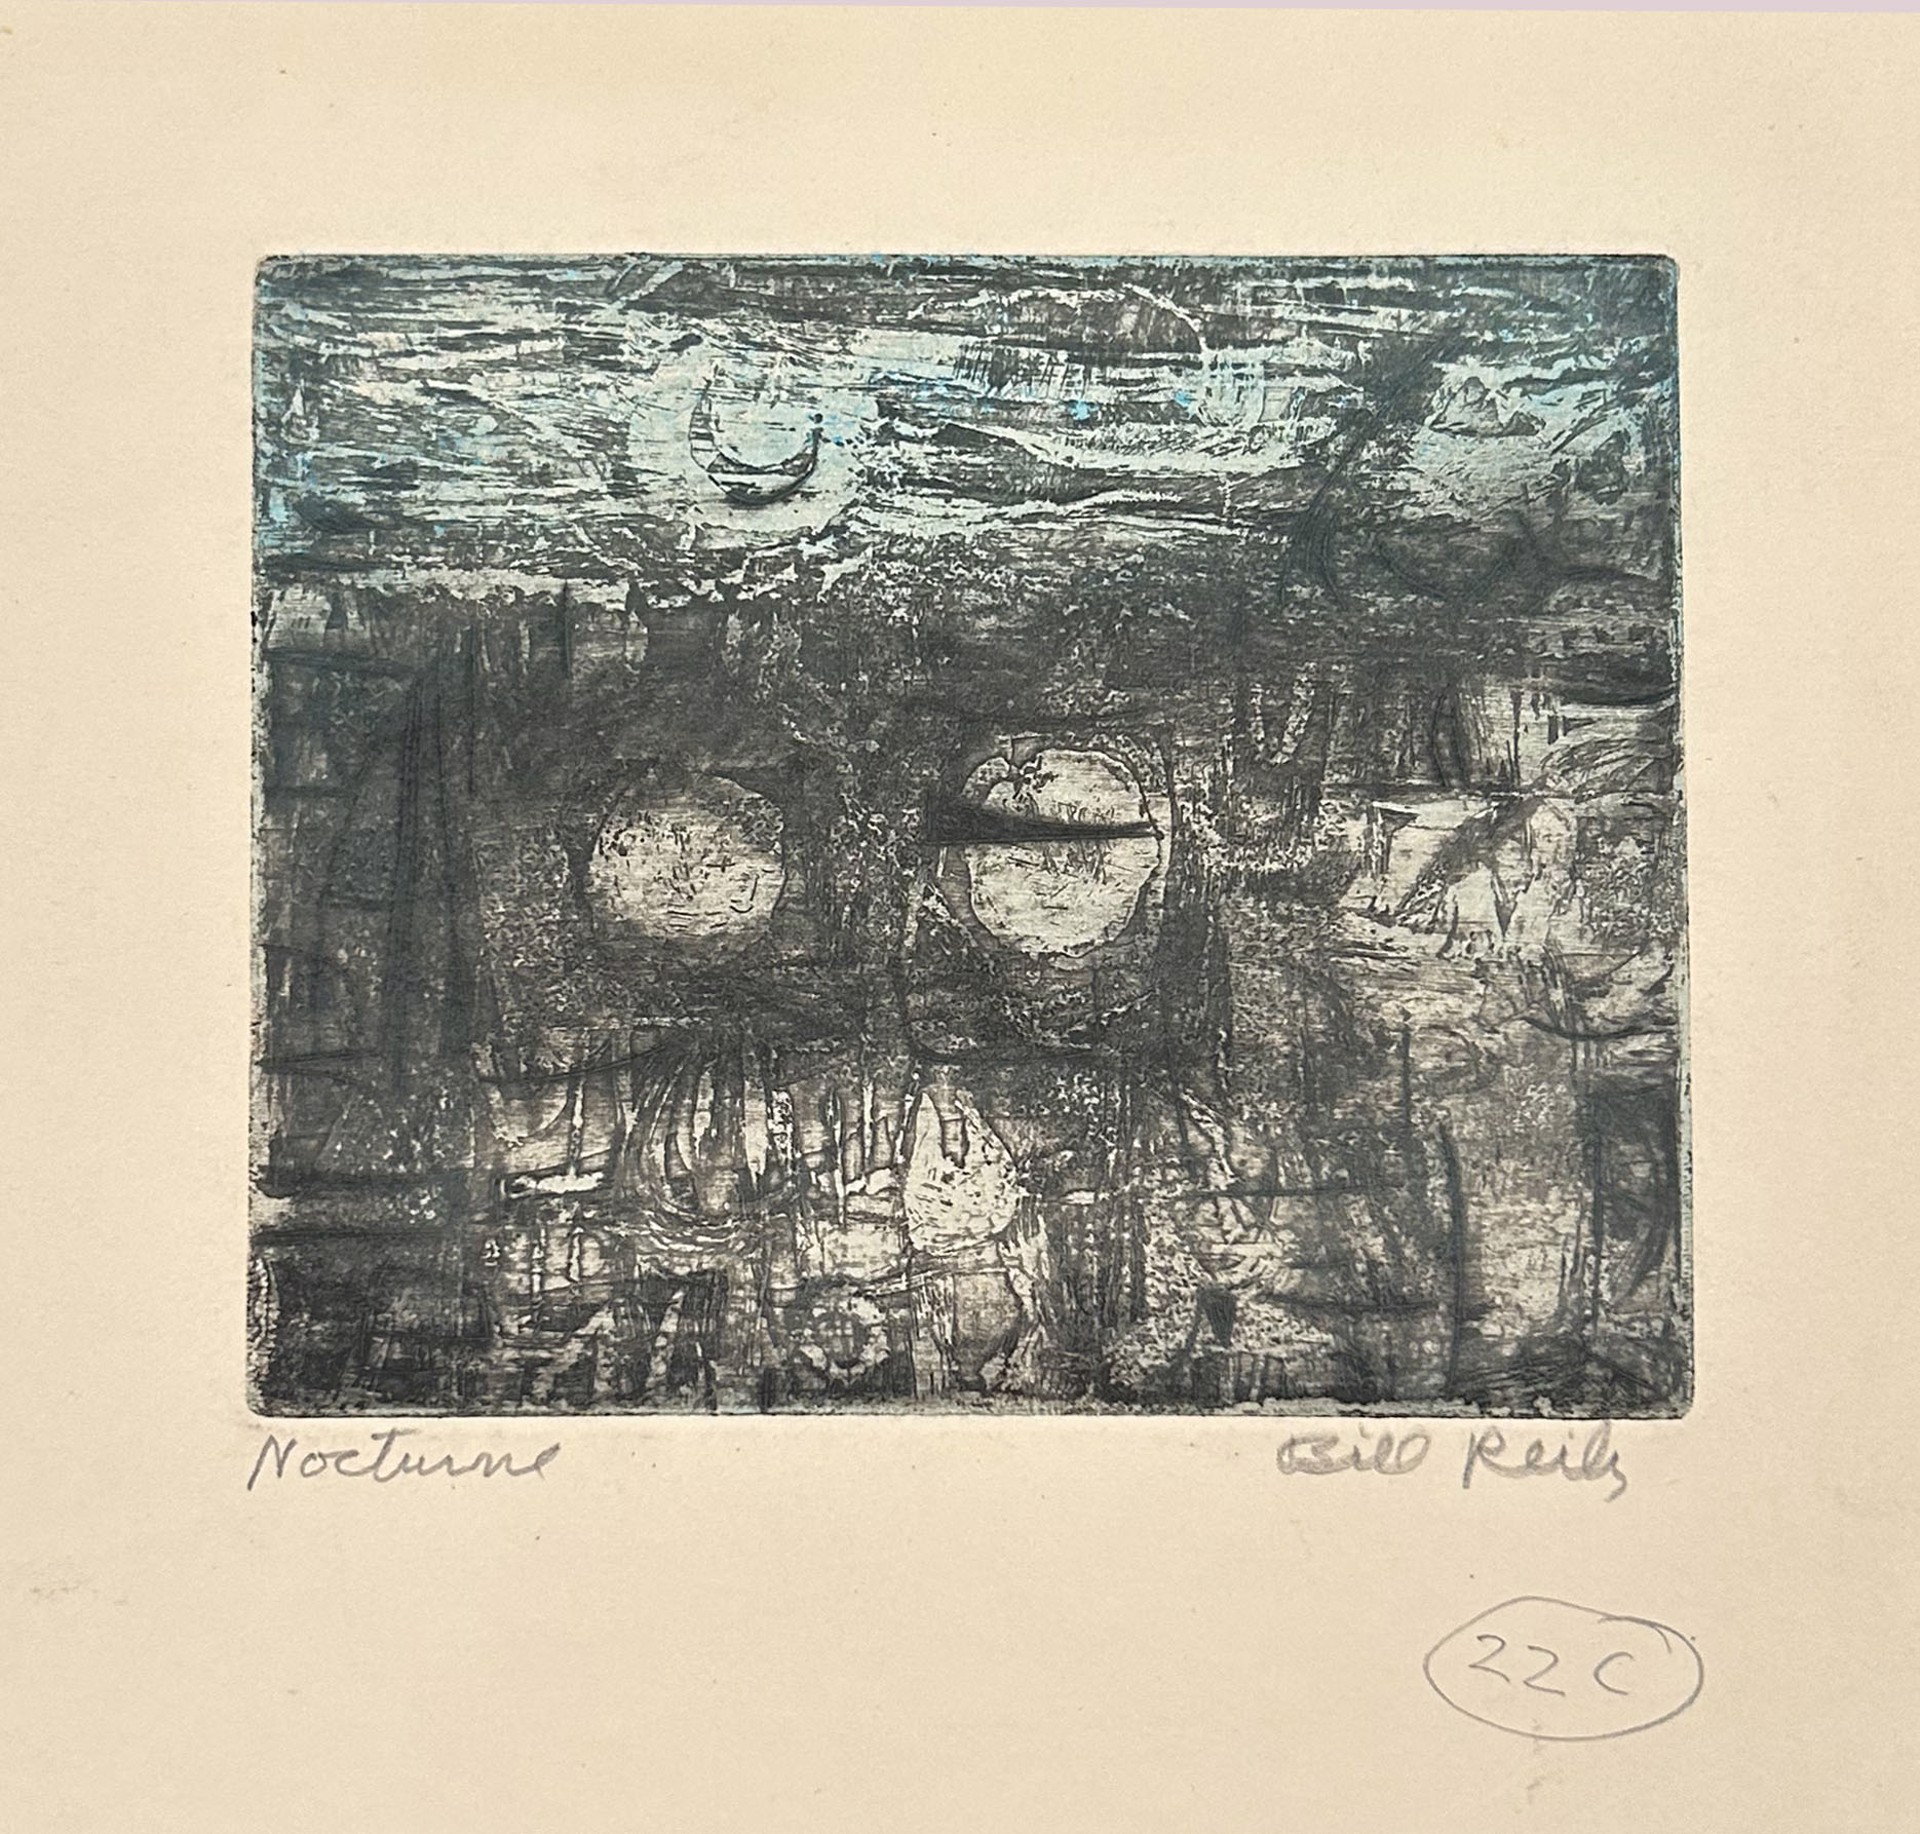 22c(1). Nocturne (Artist's proof) by Bill Reily - Prints